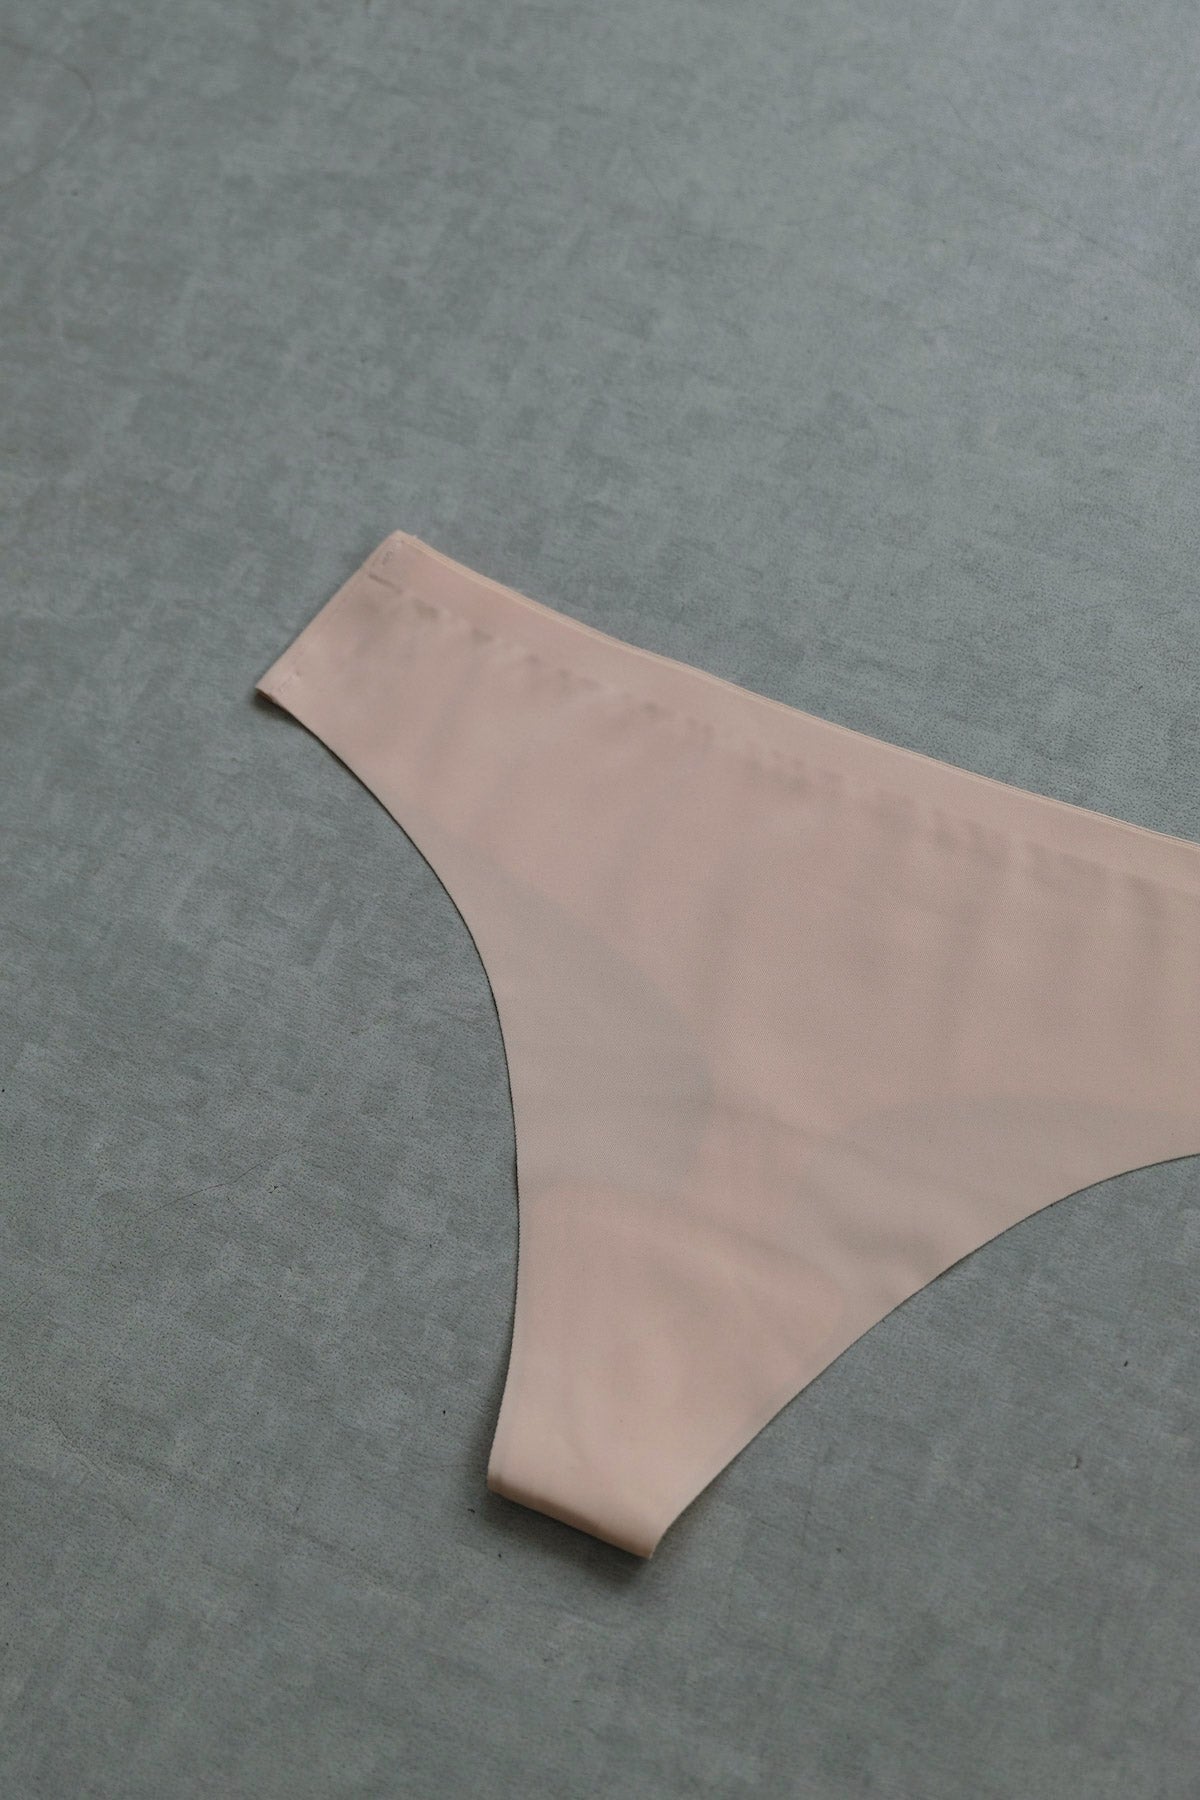 Invisible Seamless Thong in Cream